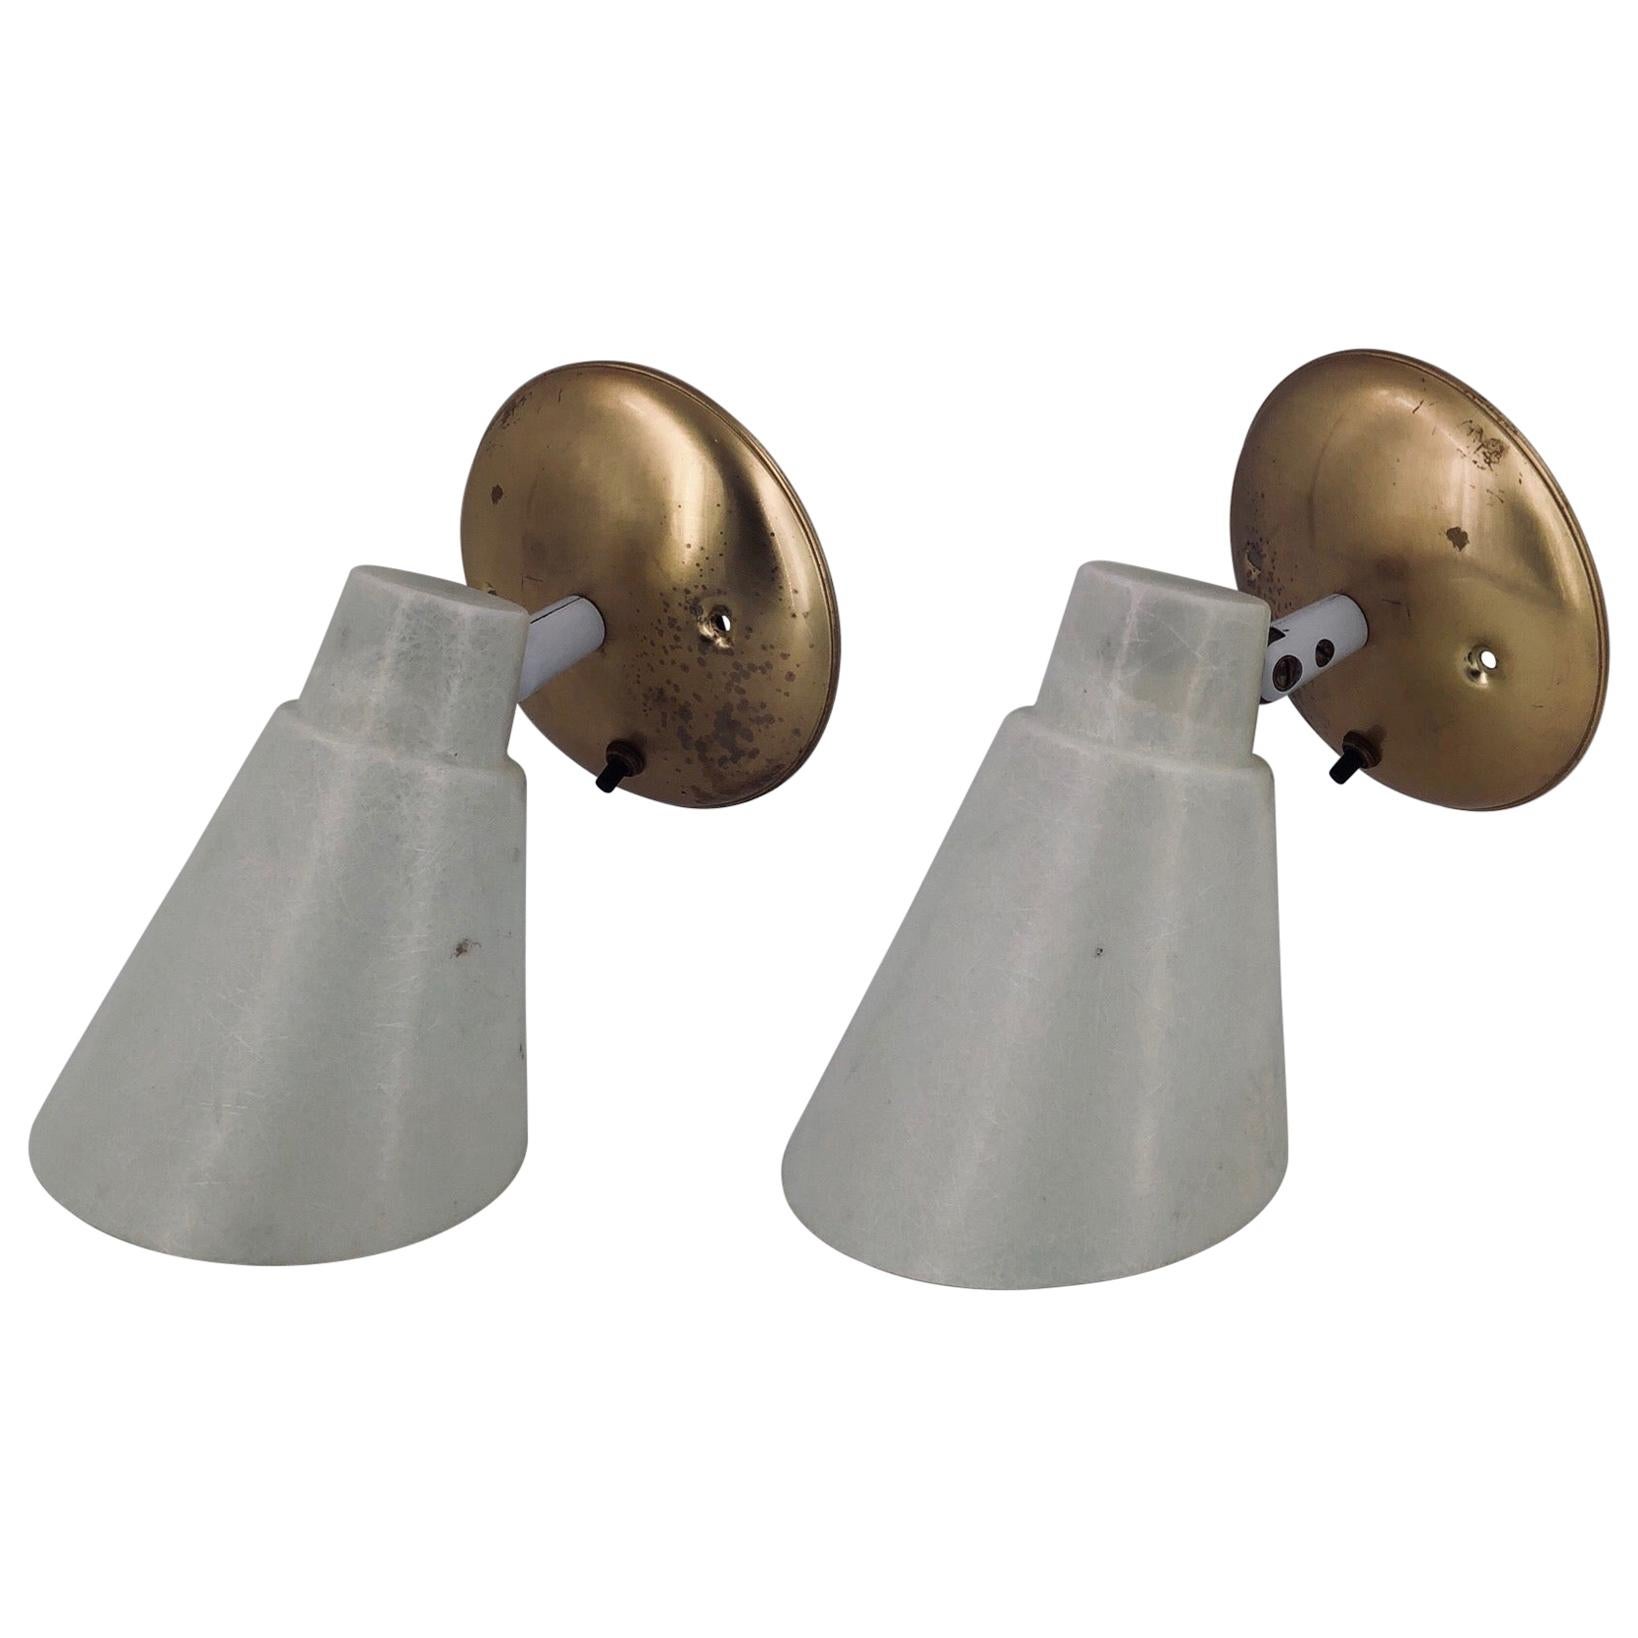 1950s Atomic Age Pair of Fiberglass and Brass Multidirectional Wall Sconces